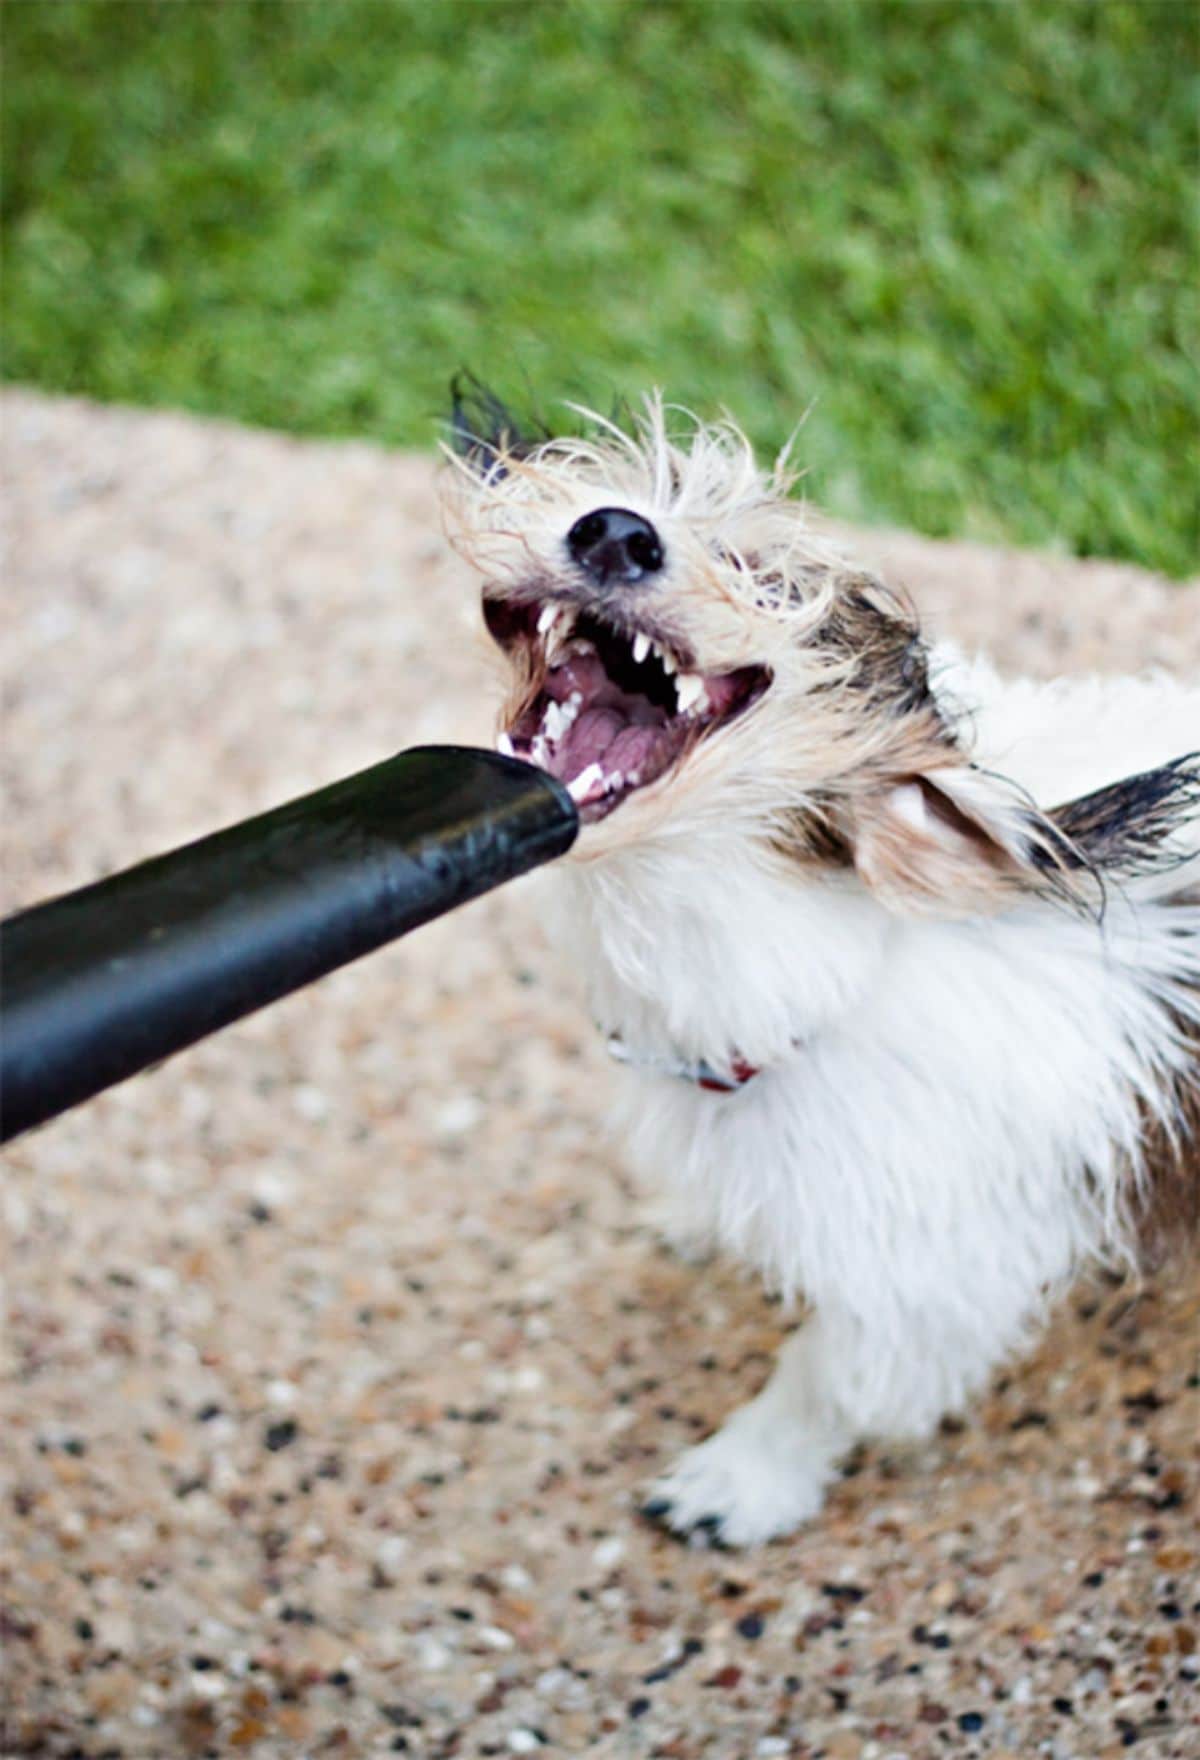 fluffy white and black dog getting the lips blown back with a leaf blower